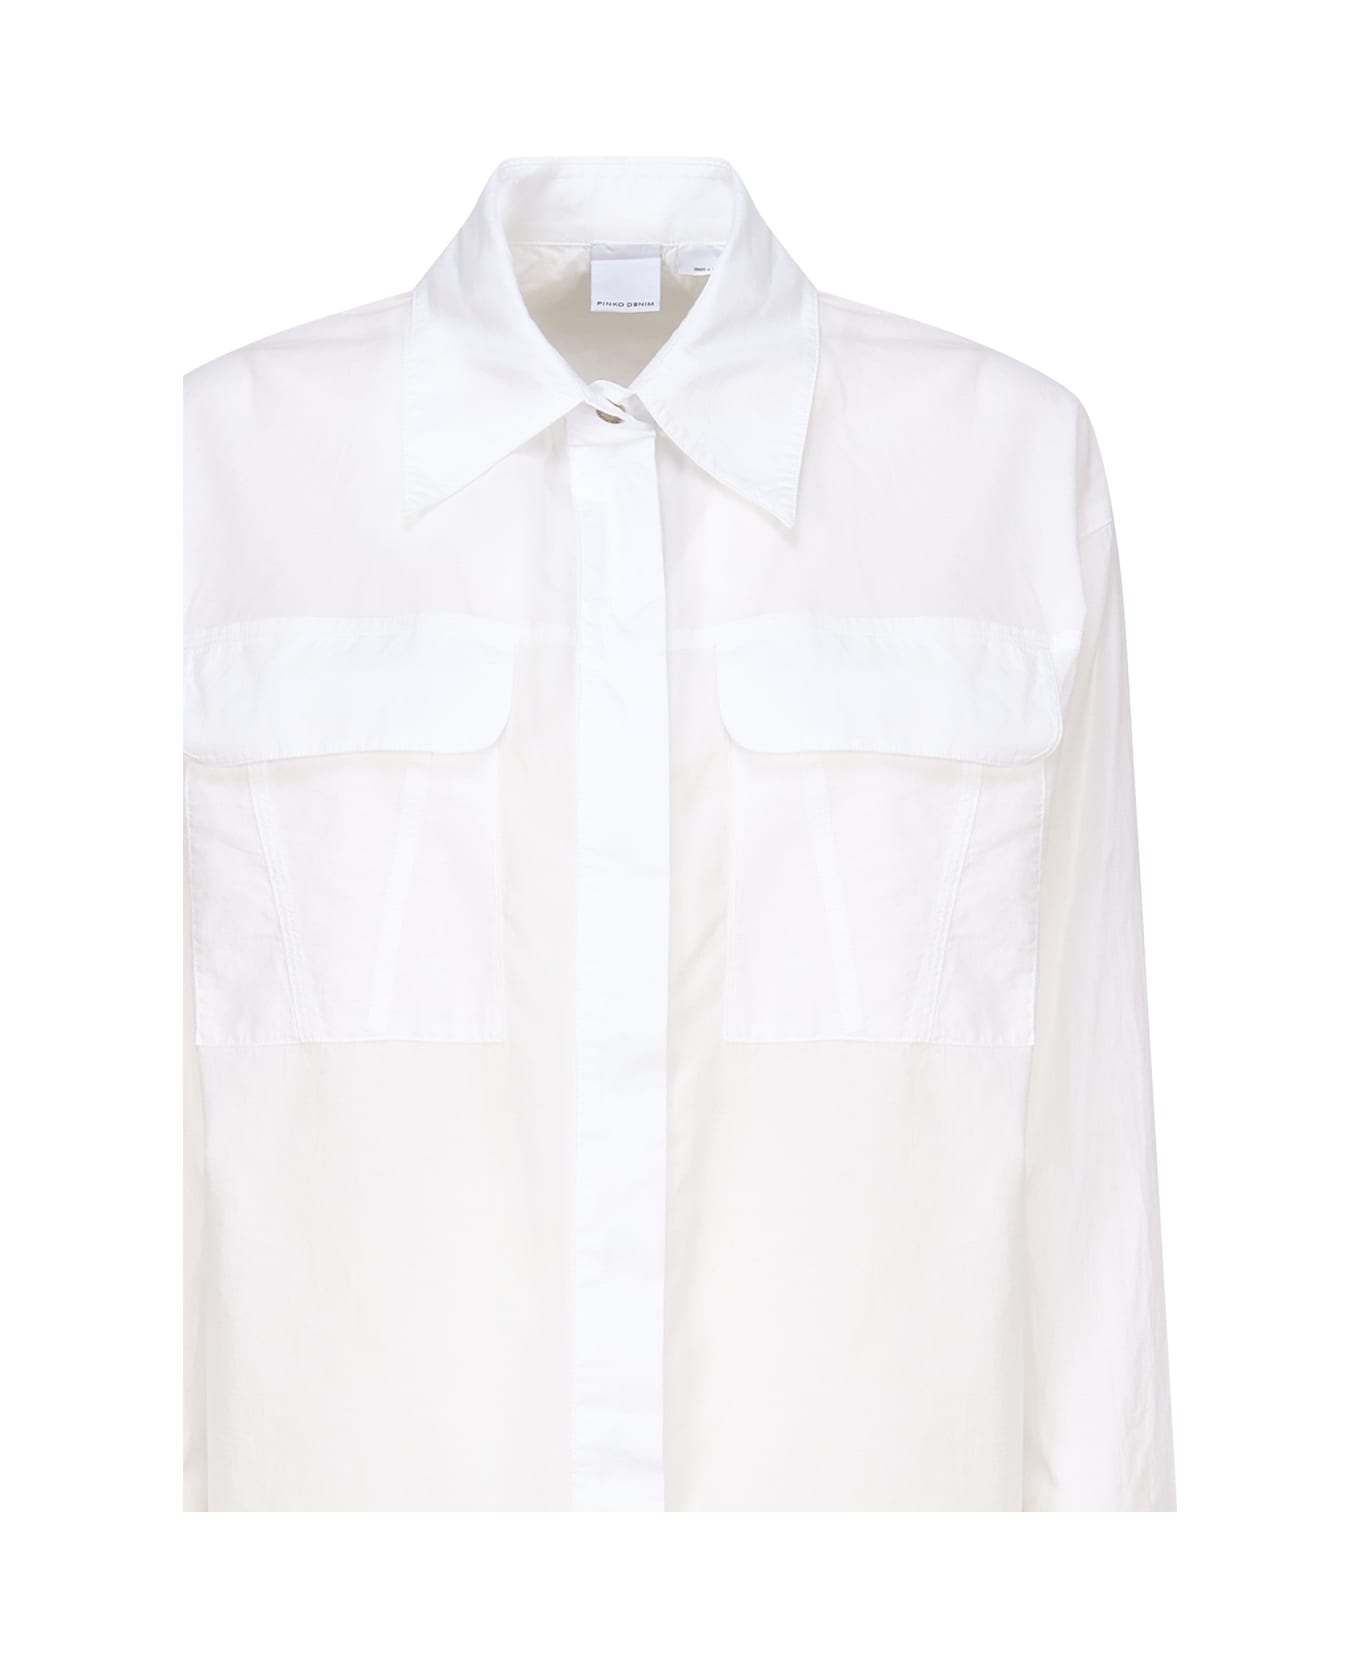 Pinko Concealed Fastened Shirt - White シャツ